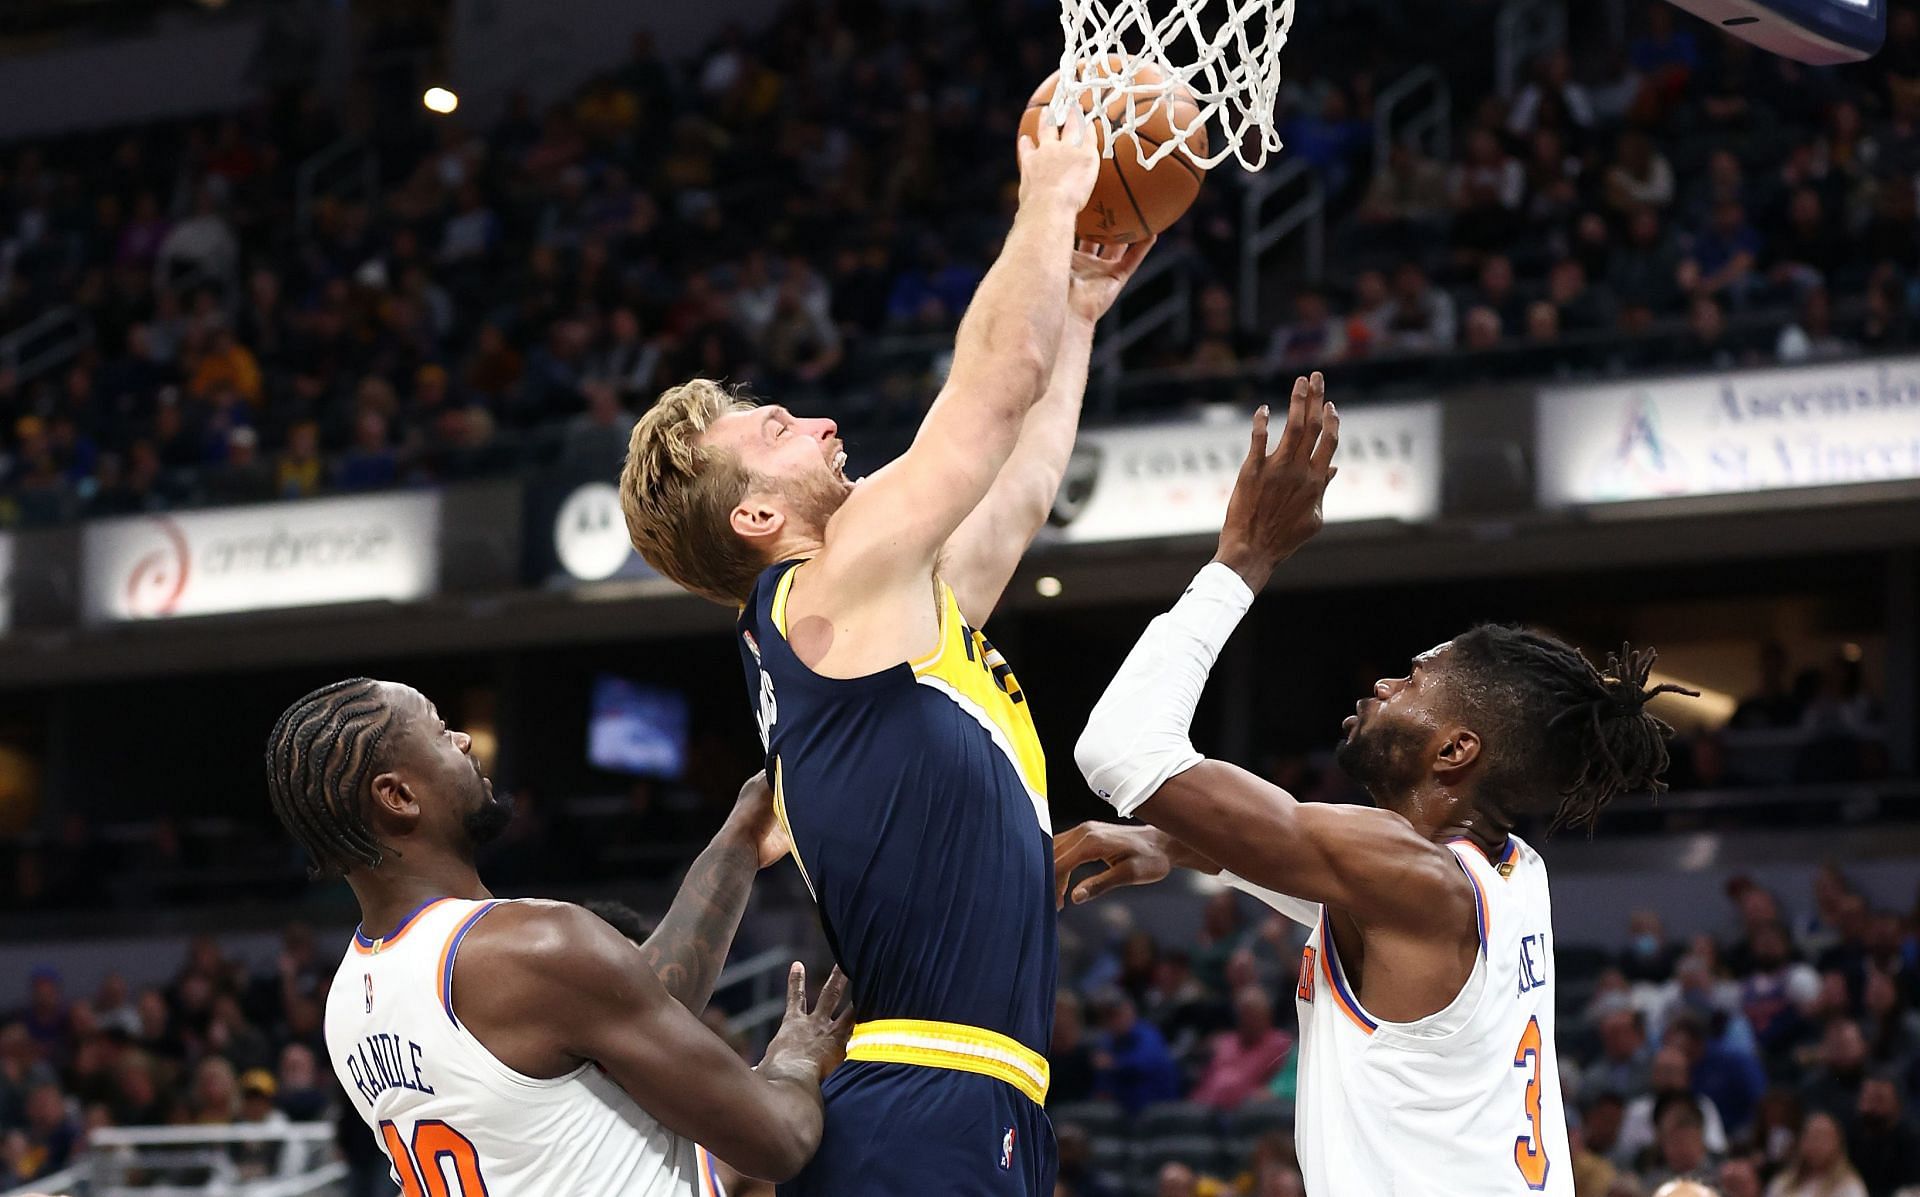 The New York Knicks lost to the Indiana Pacers on Wednesday.